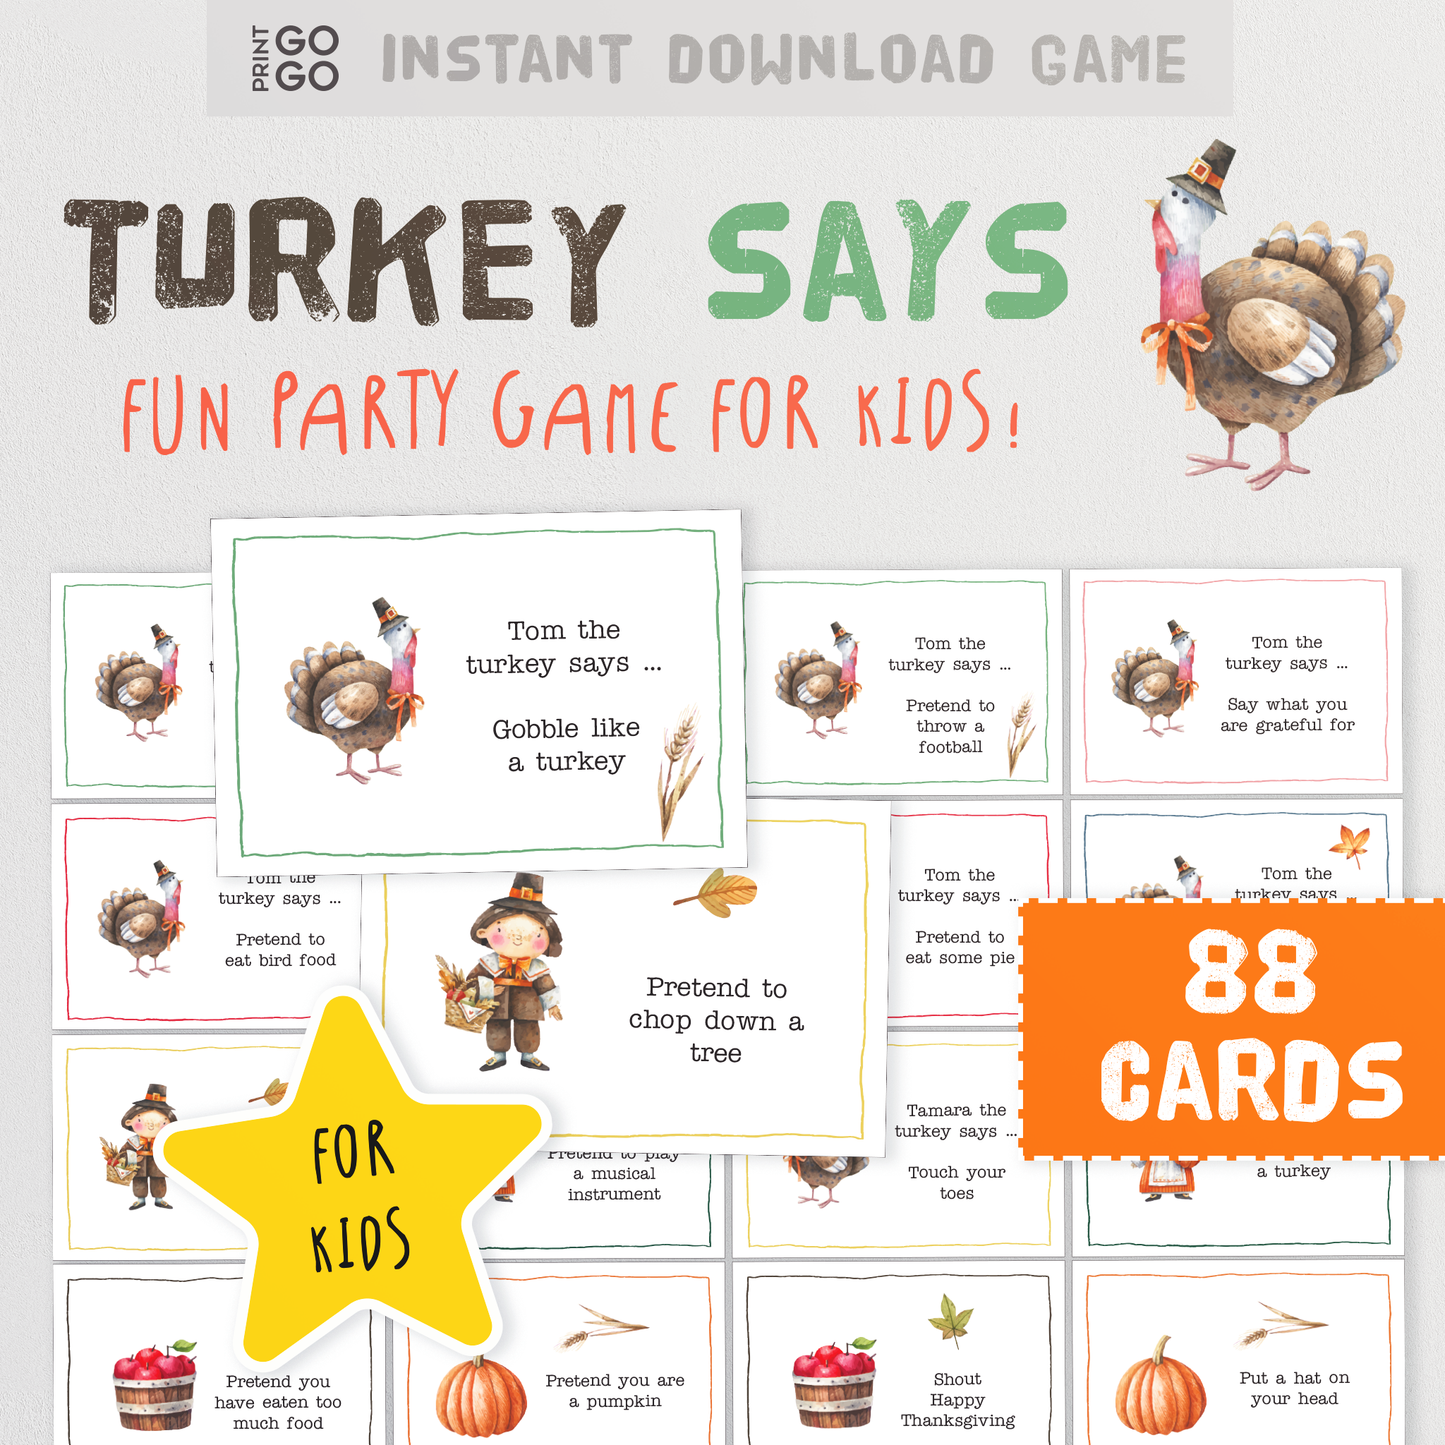 Turkey Says - The Fun Thanksgiving Party Game of Following Directions for Kids!